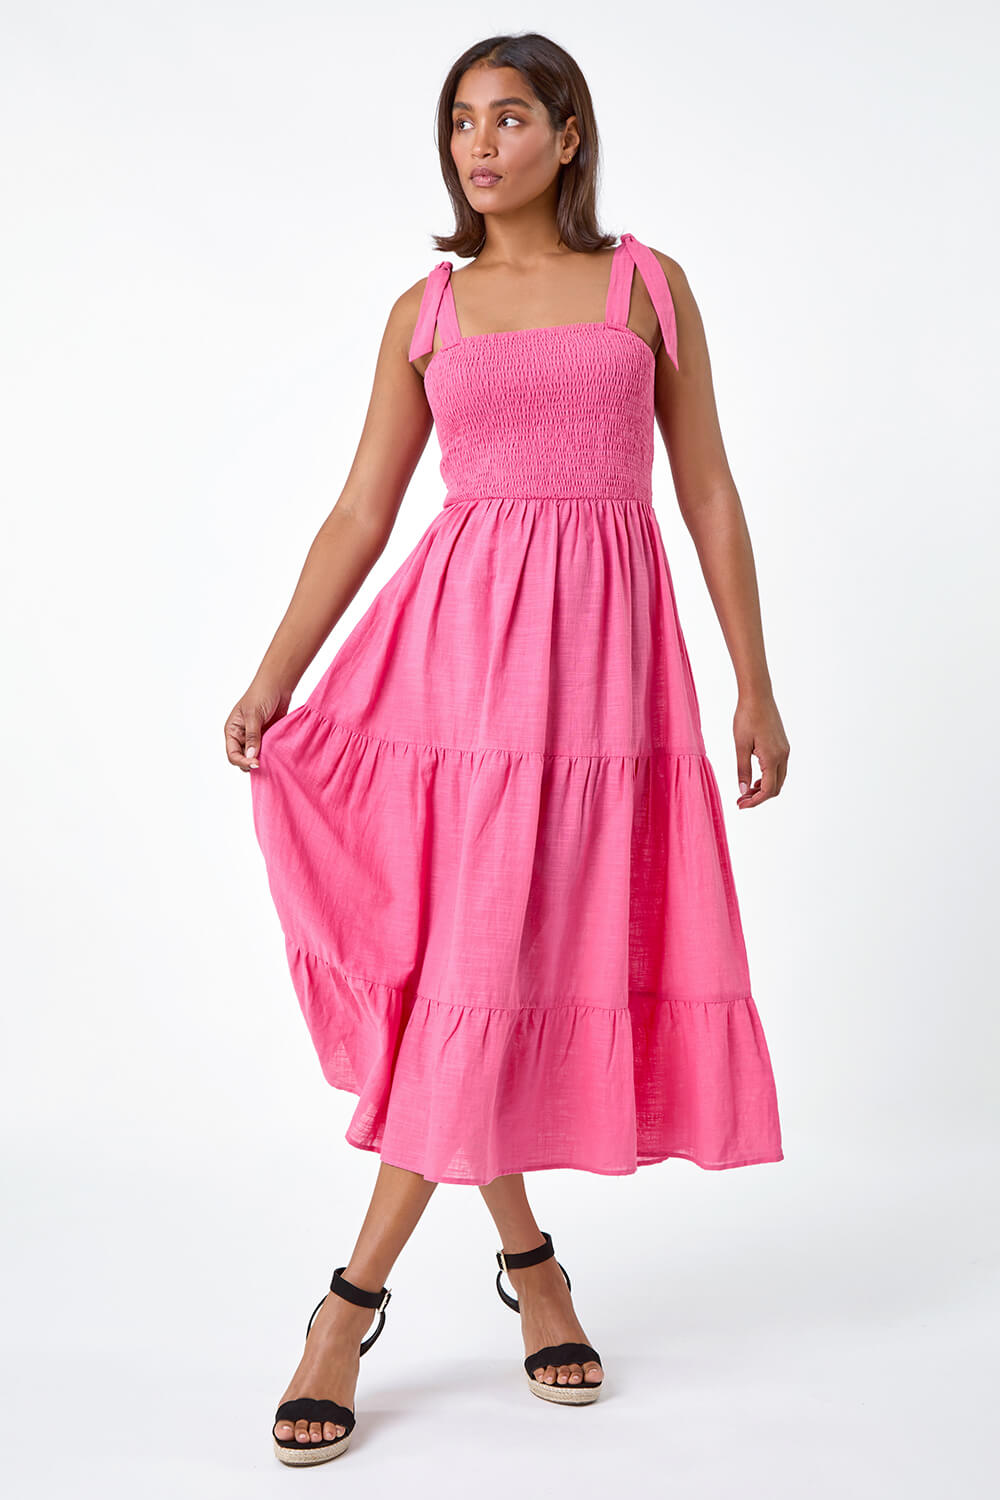 PINK Shirred Tie Cotton Tiered Midi Dress, Image 3 of 5